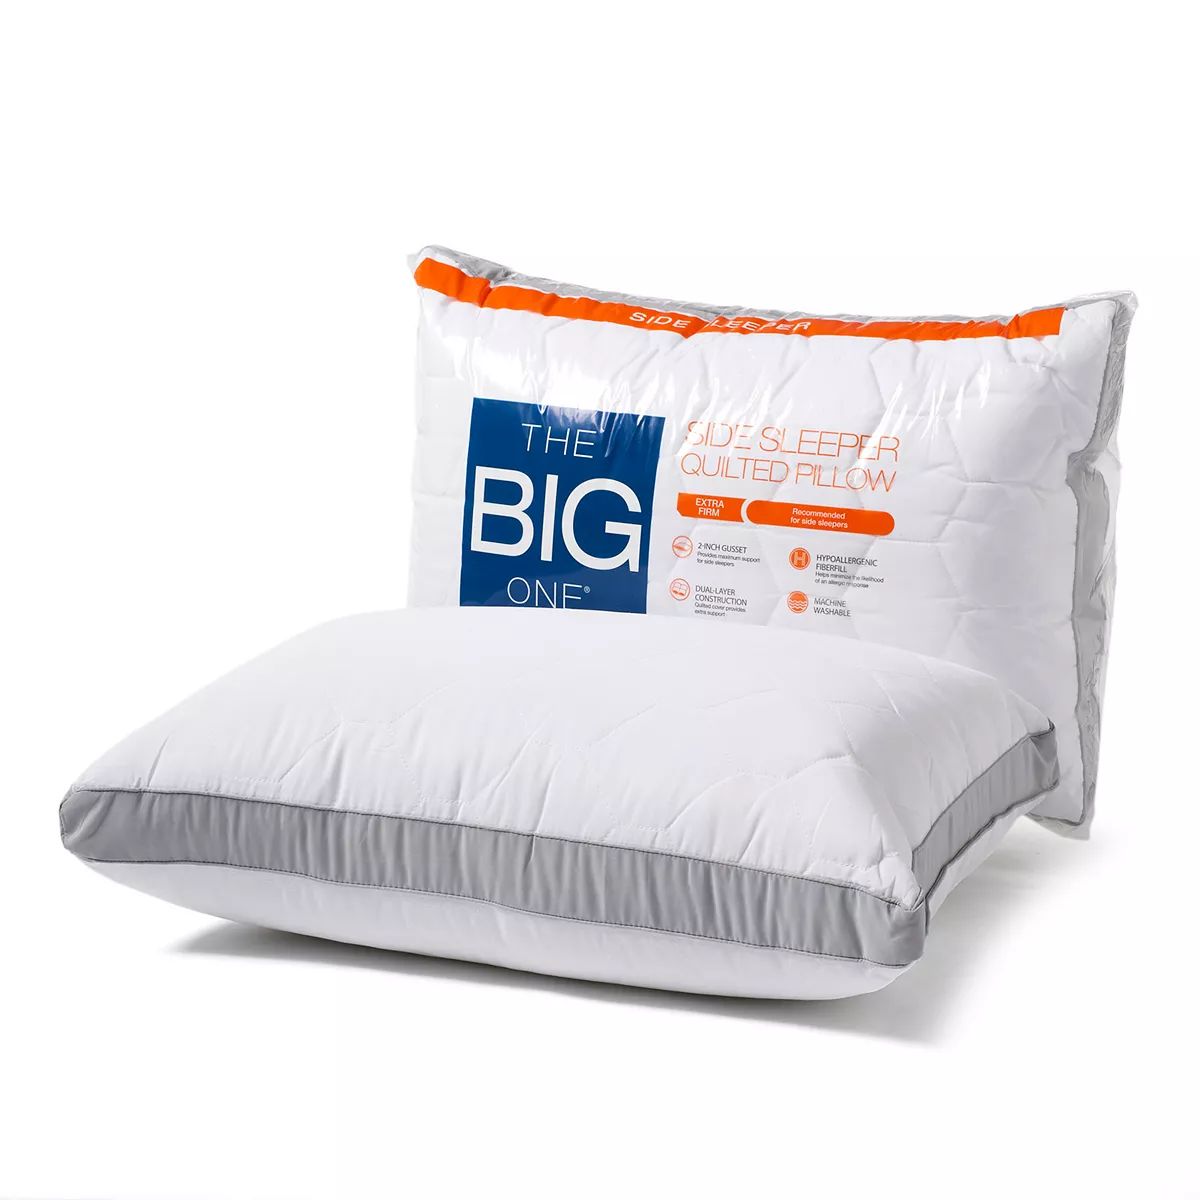 The Big One® Quilted Side Sleeper Bed Pillow | Kohl's